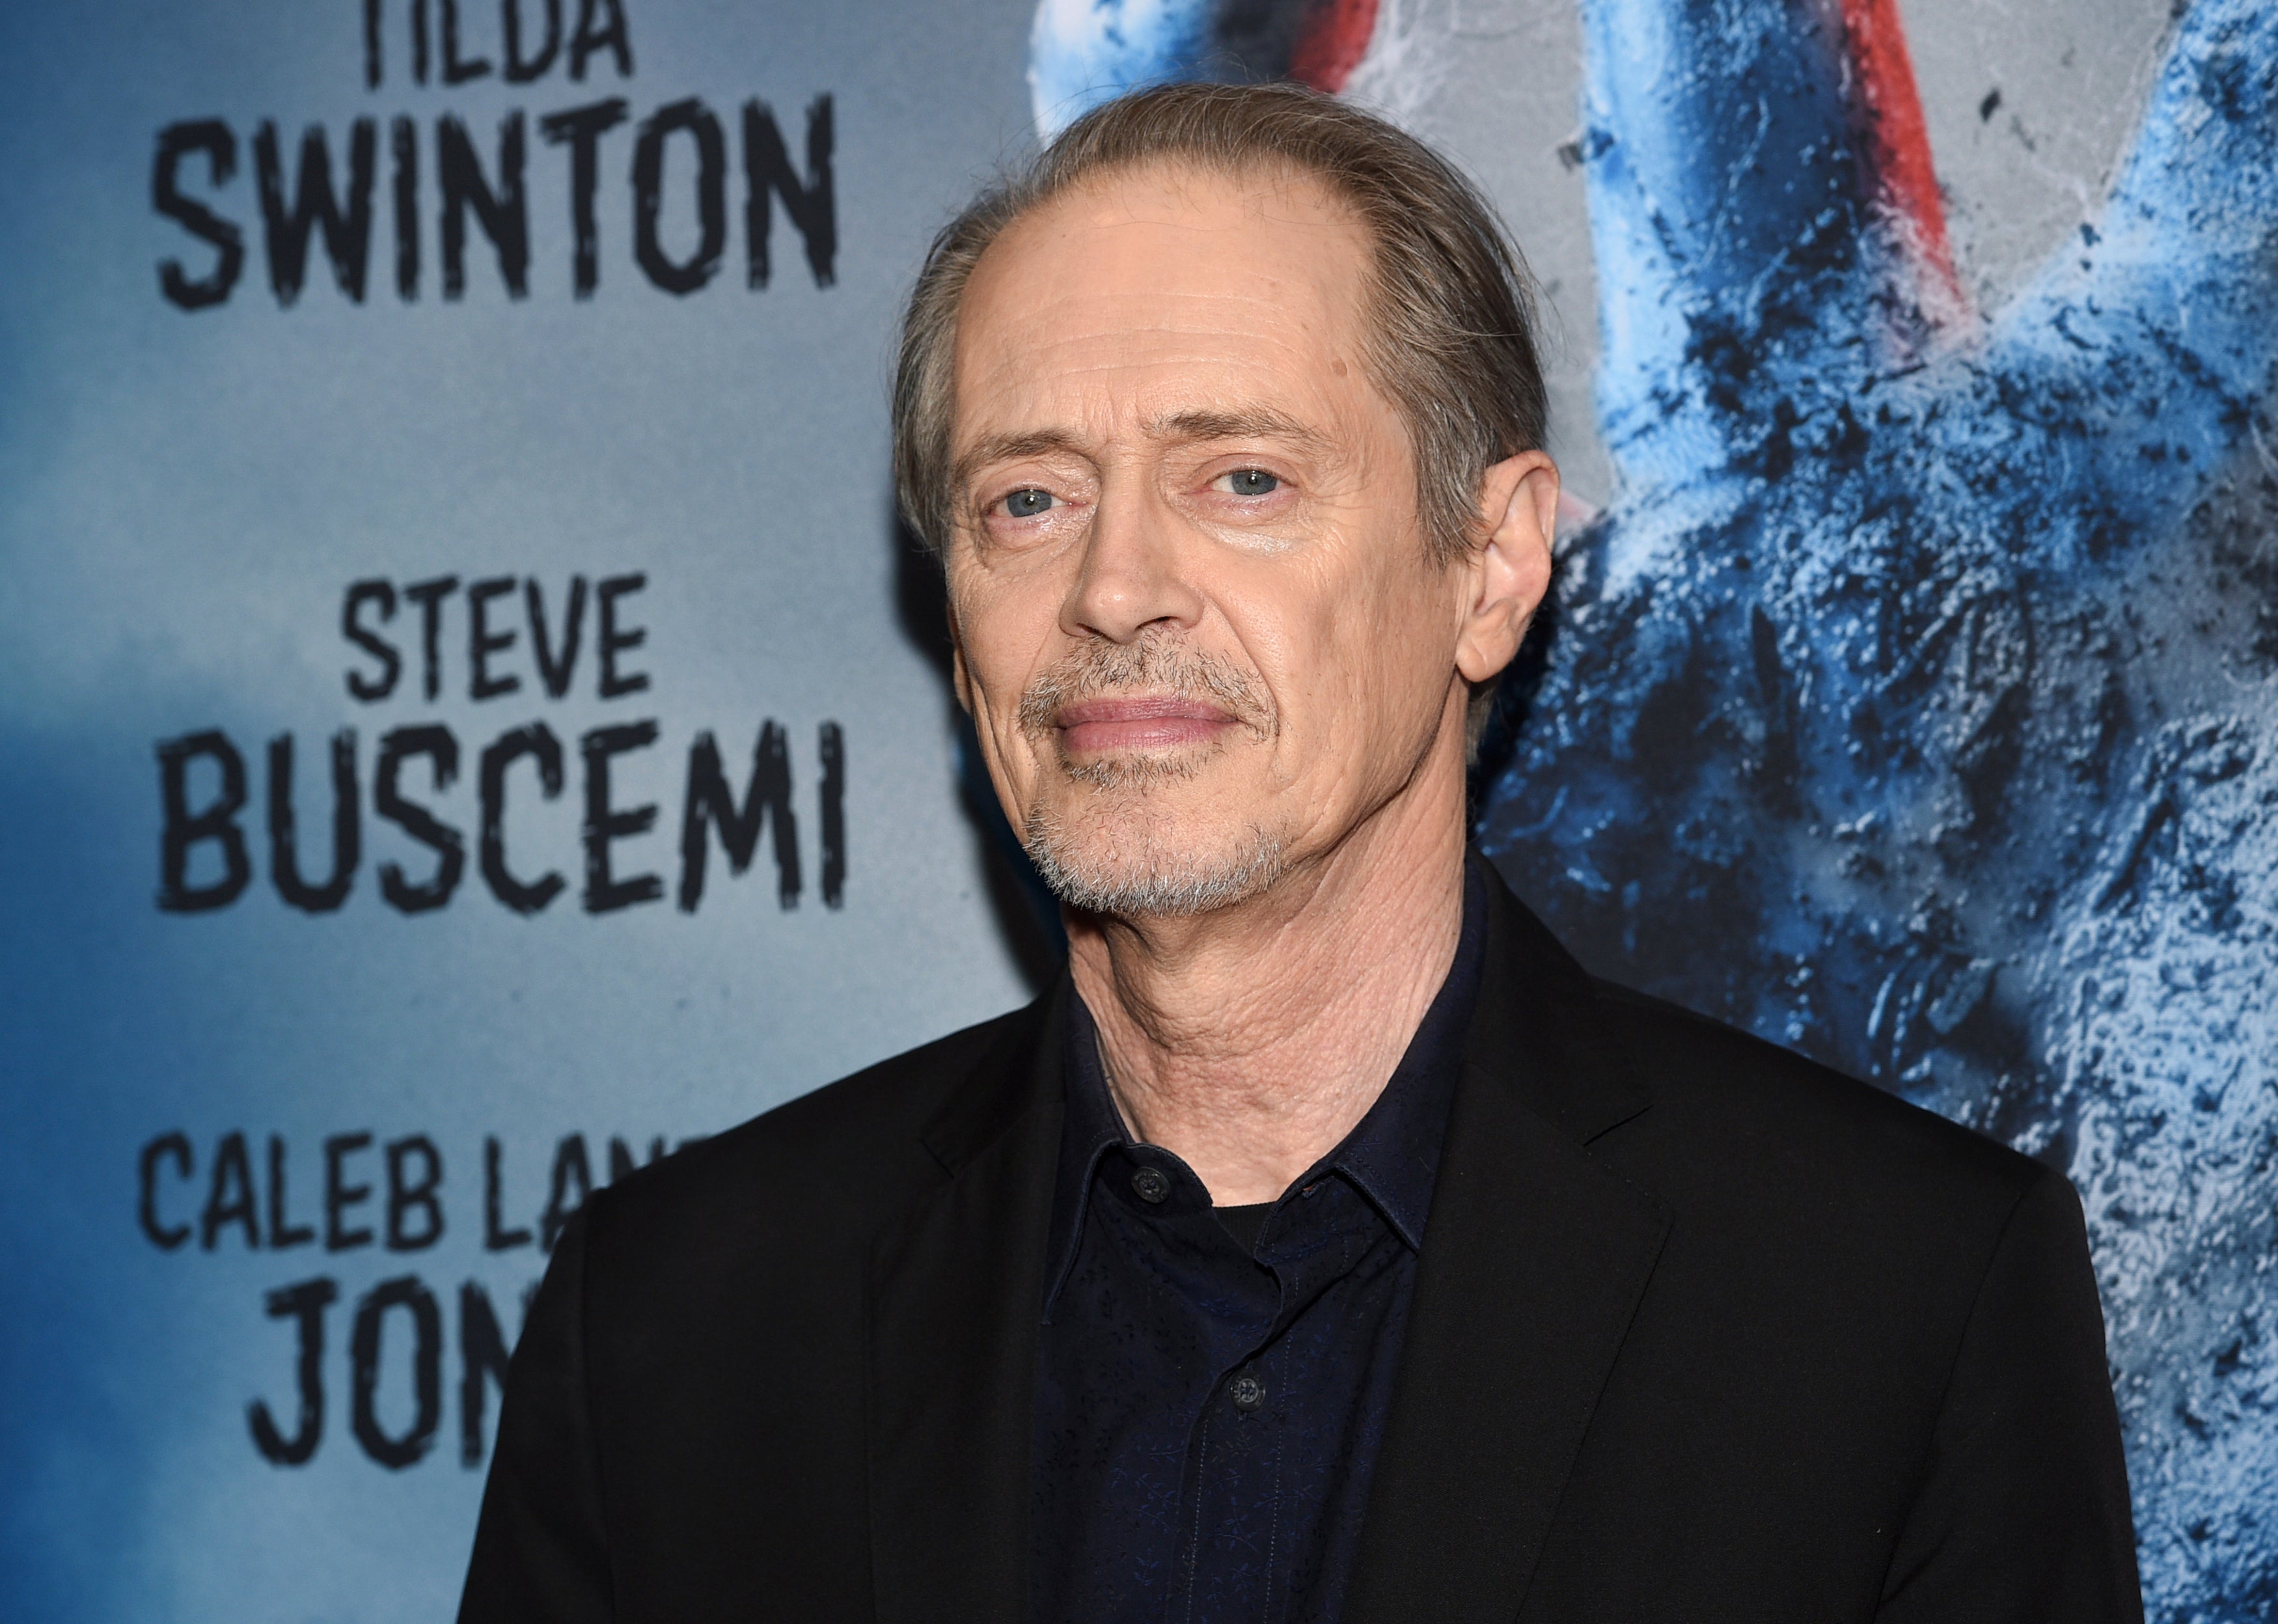 Actor Steve Buscemi was randomy assaulted and taken to hospital last week in New York City